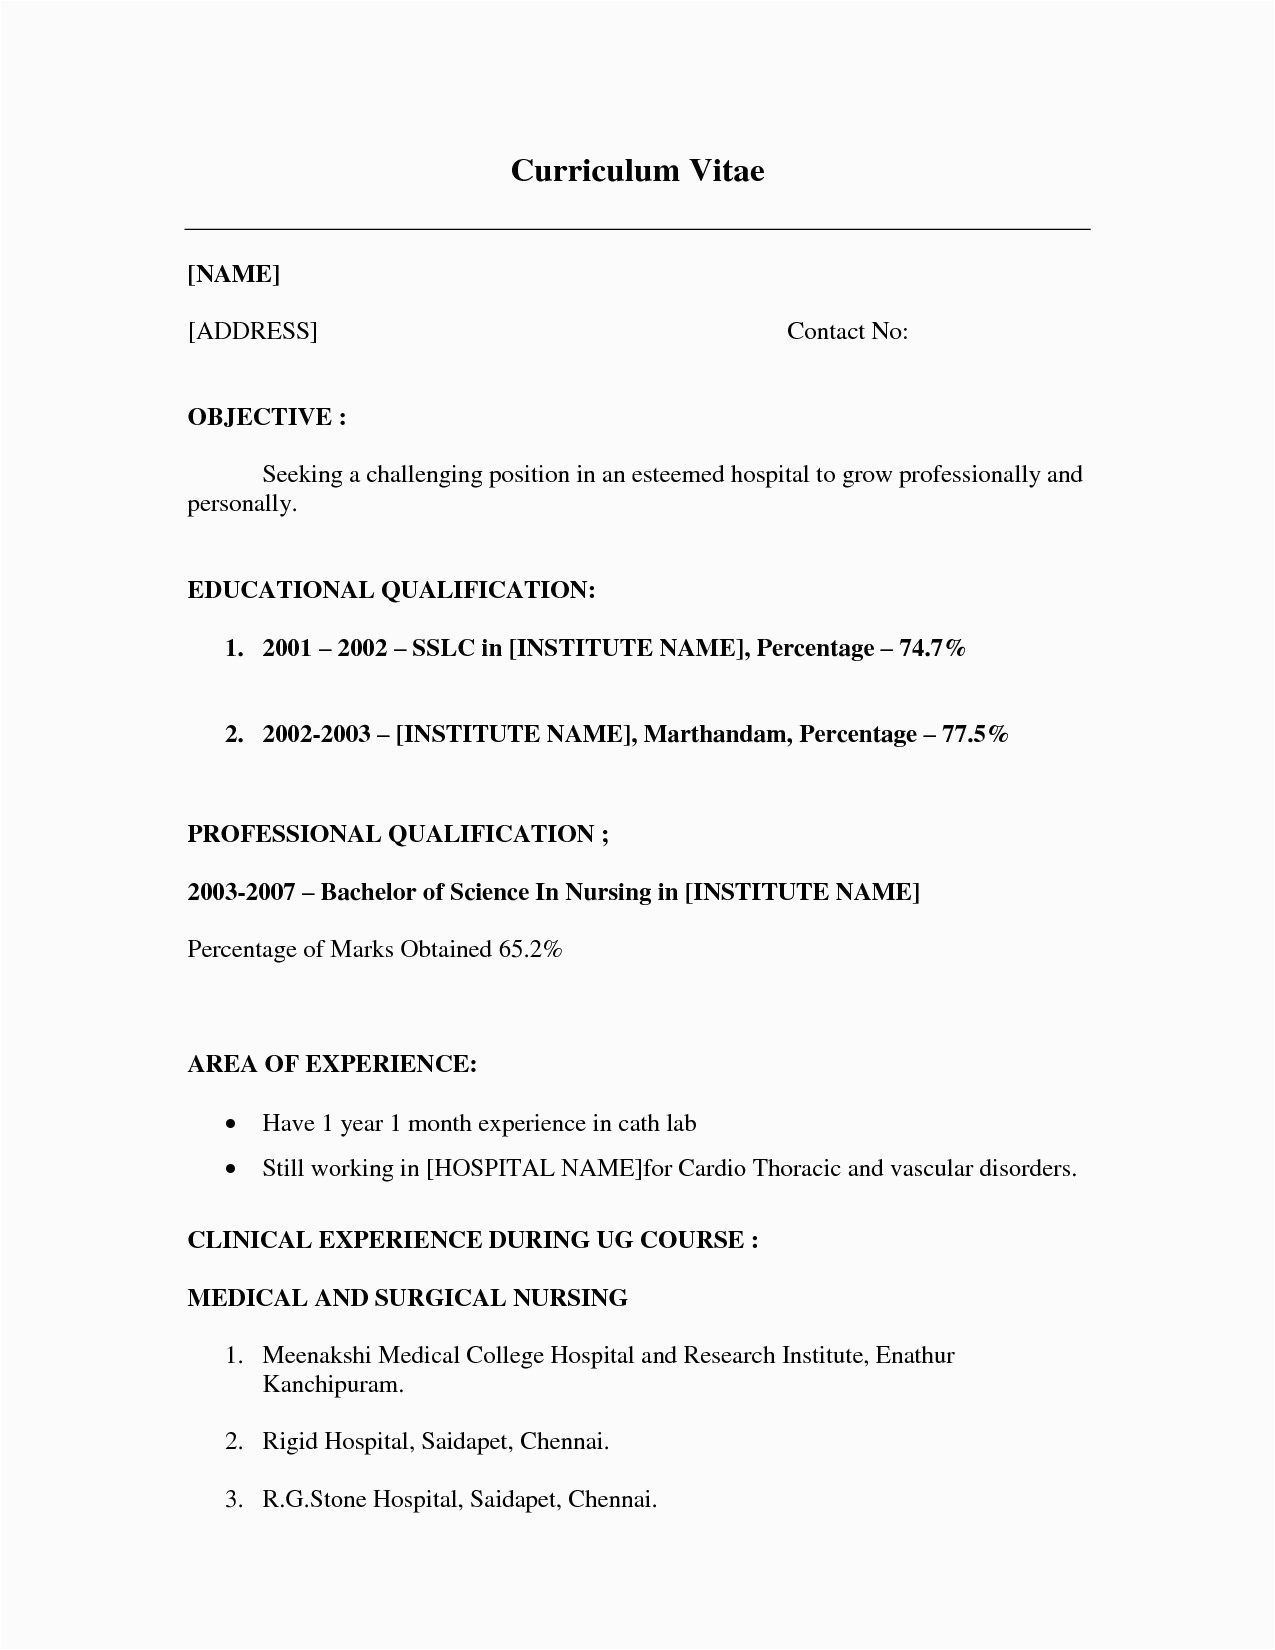 resume examples little work experience